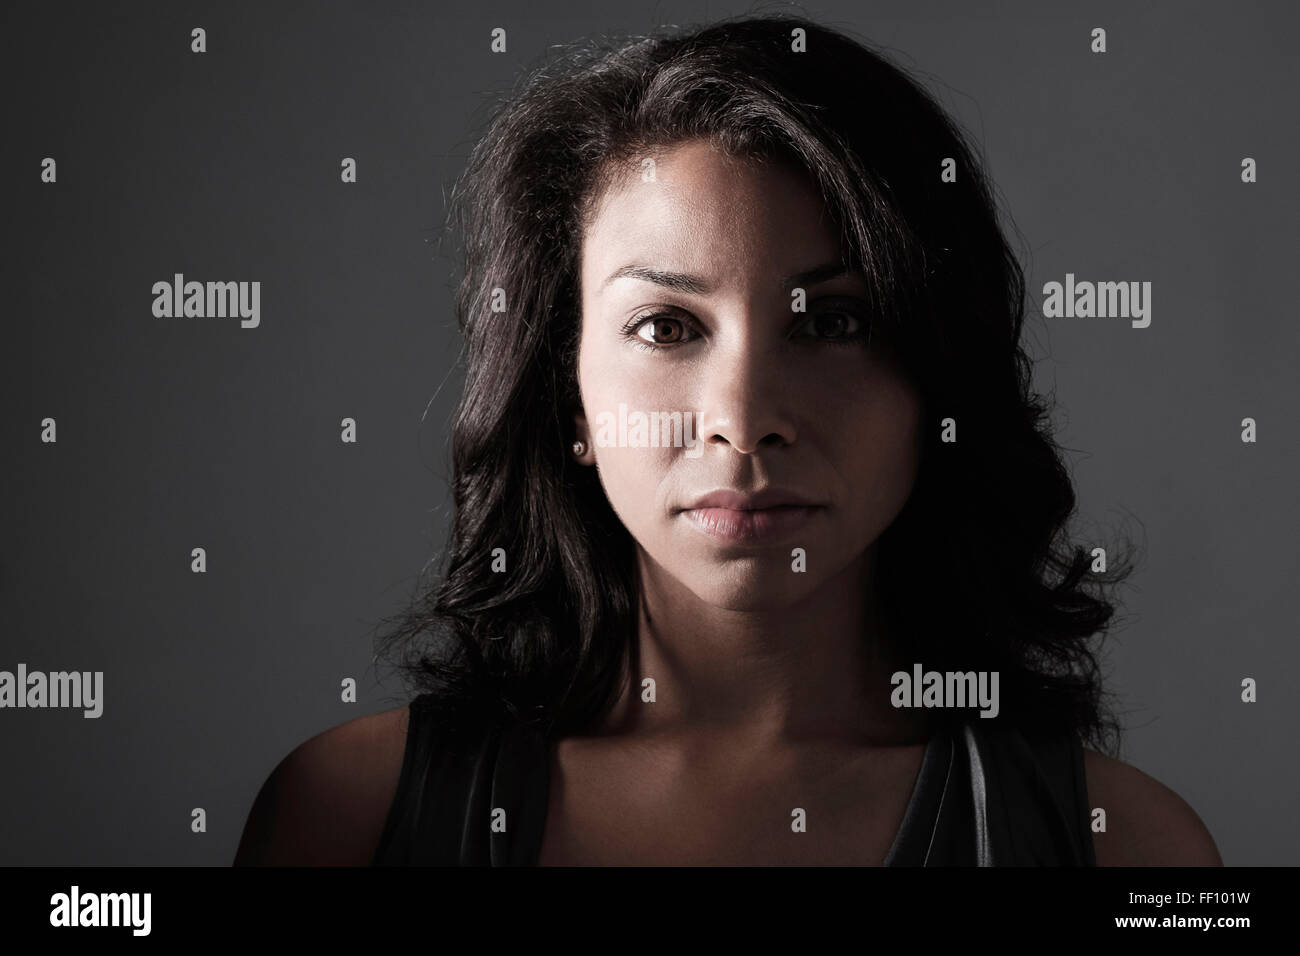 Mixed race woman with serious expression Stock Photo